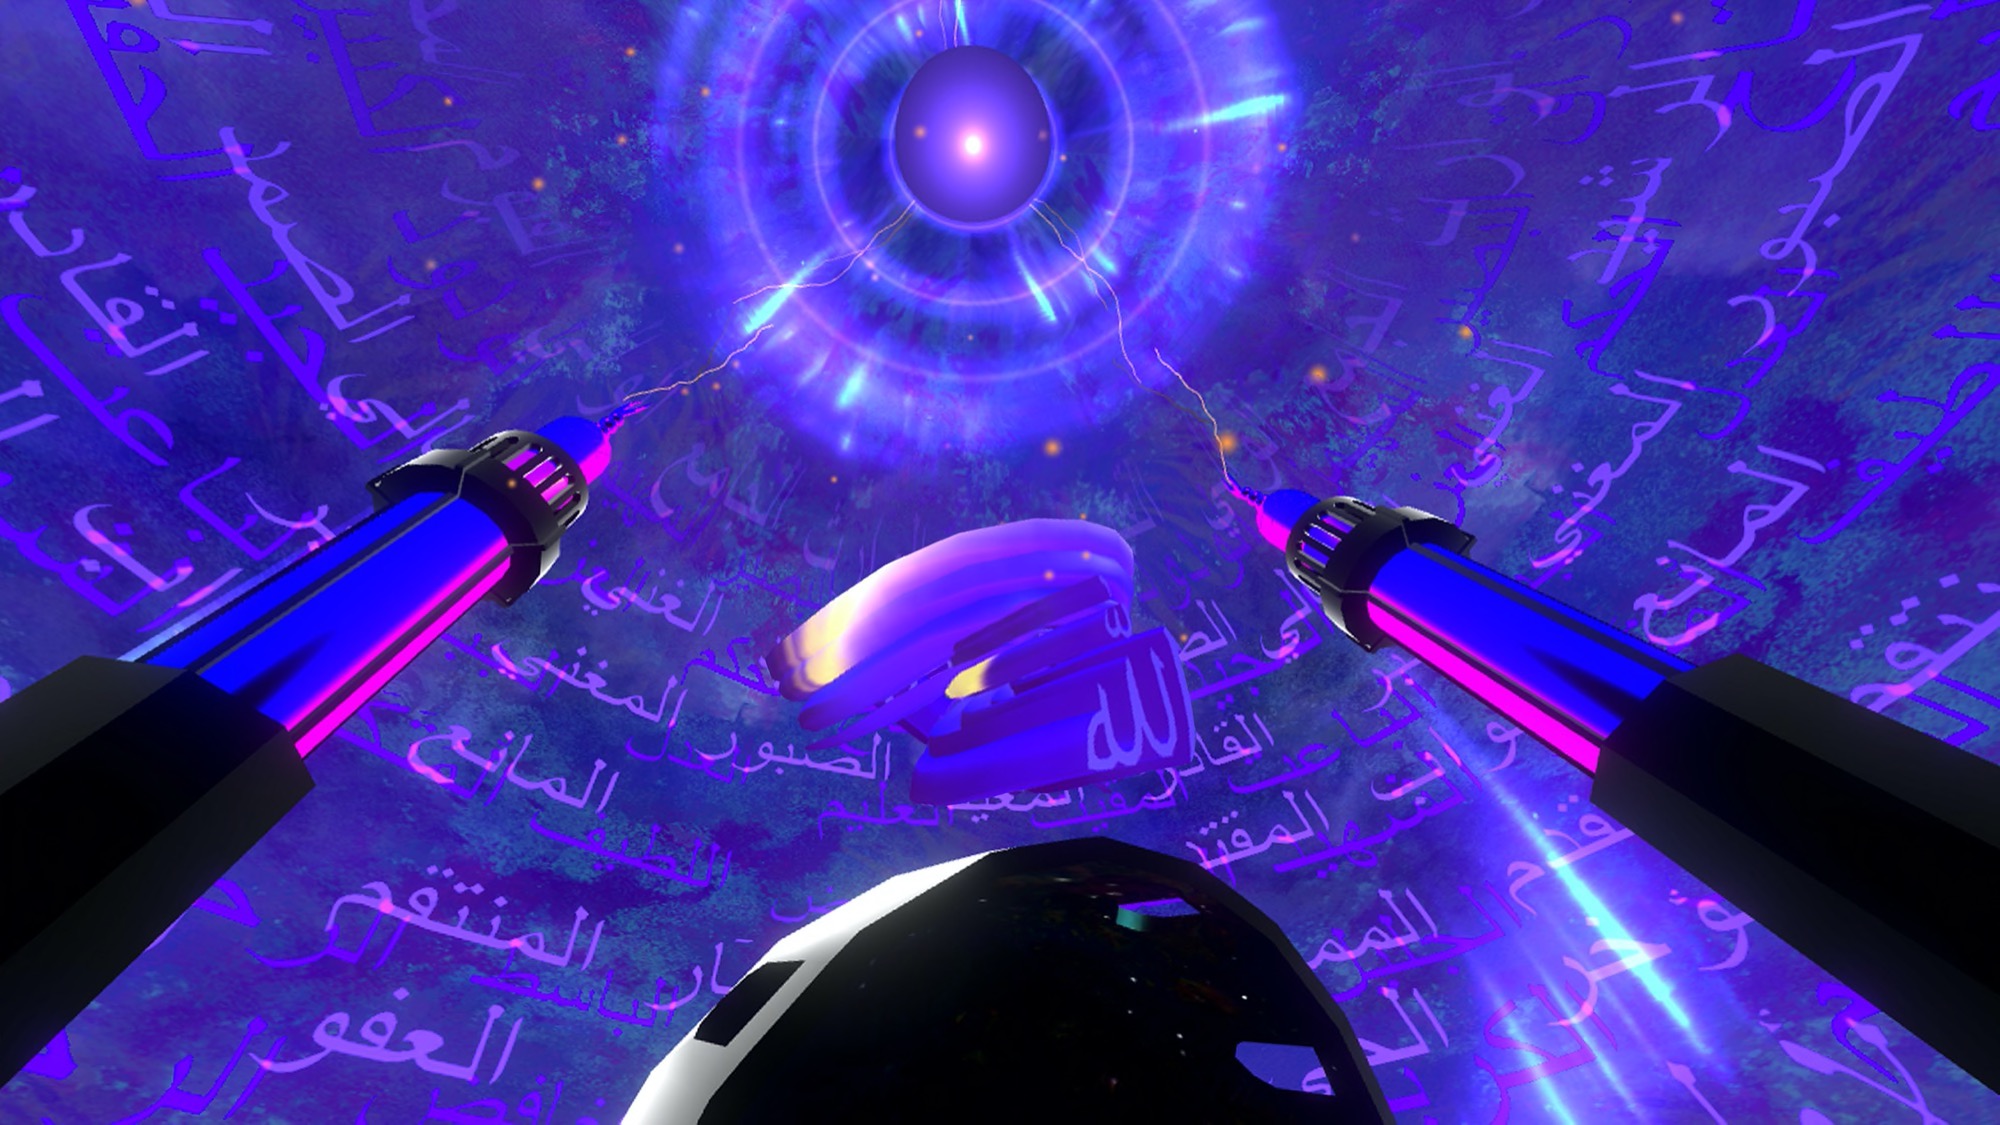 Mohamed Chamas, تصوف <em>(cyber tasawwuf)</em>, 2018, video (recording of Virtual Reality experience). Duration: 4 minutes, 1 second. Courtesy of the artist.